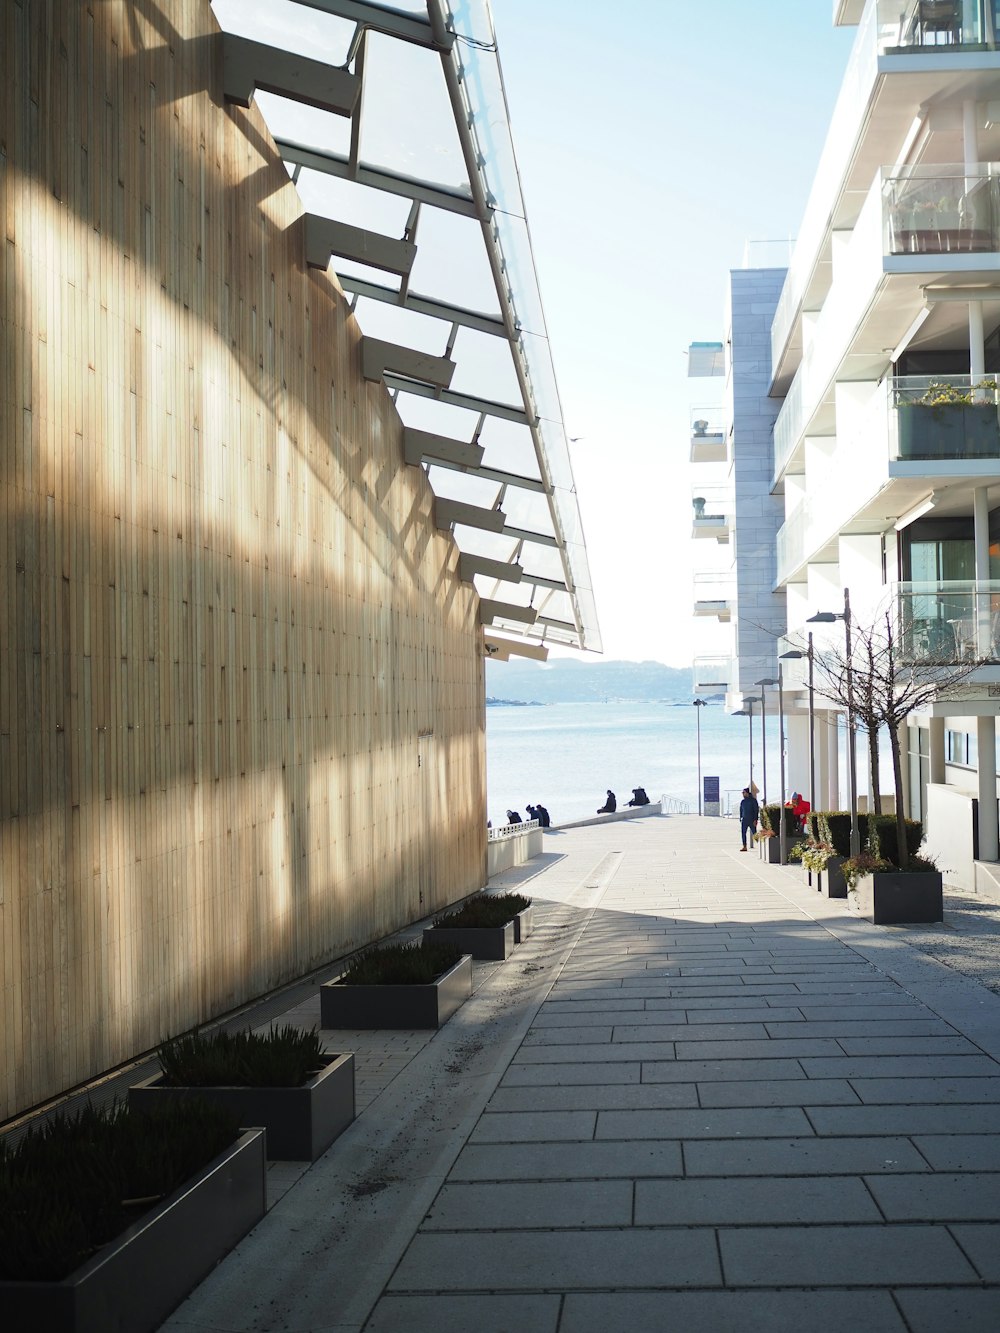 a walkway between two buildings with a view of a body of water